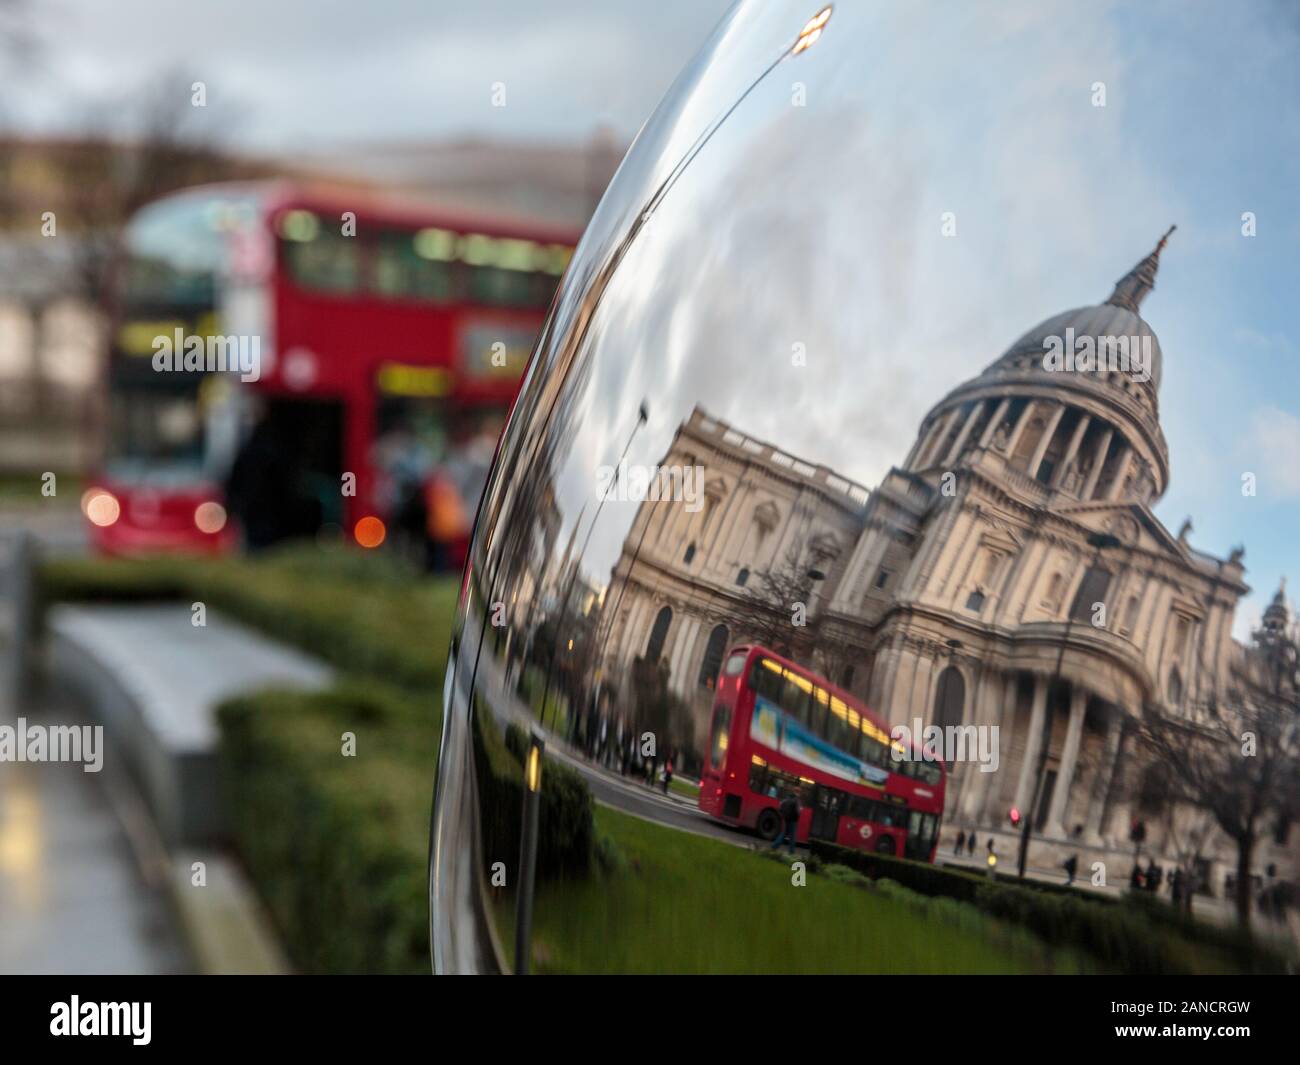 Art Reflection of St Paul's Cathedral and Red London double-decker bus, Londres, Angleterre, Royaume-Uni. Banque D'Images